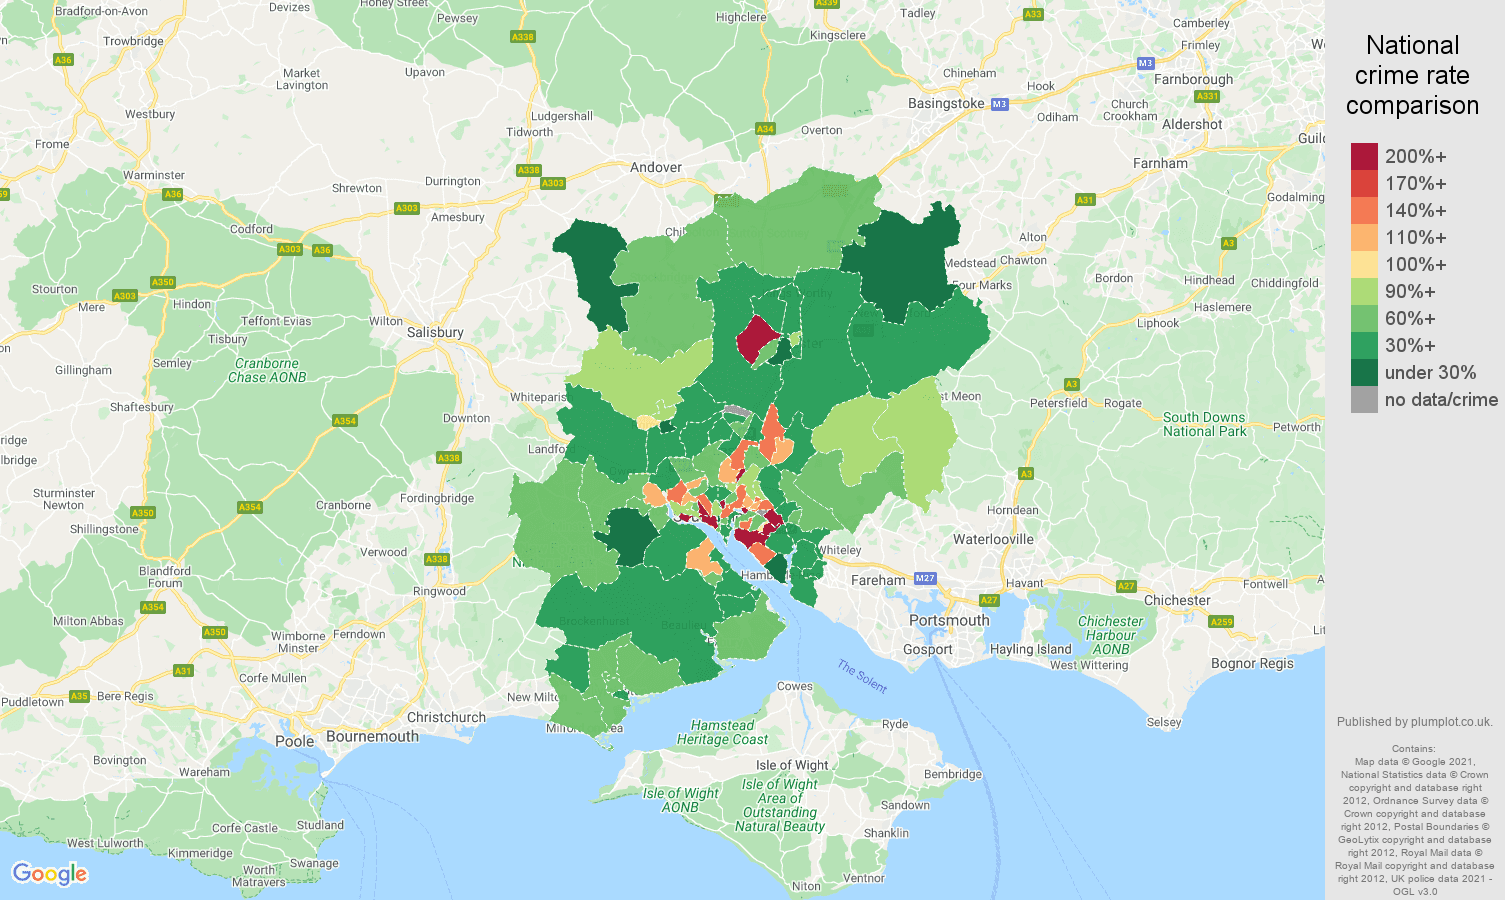 Southampton other crime rate comparison map